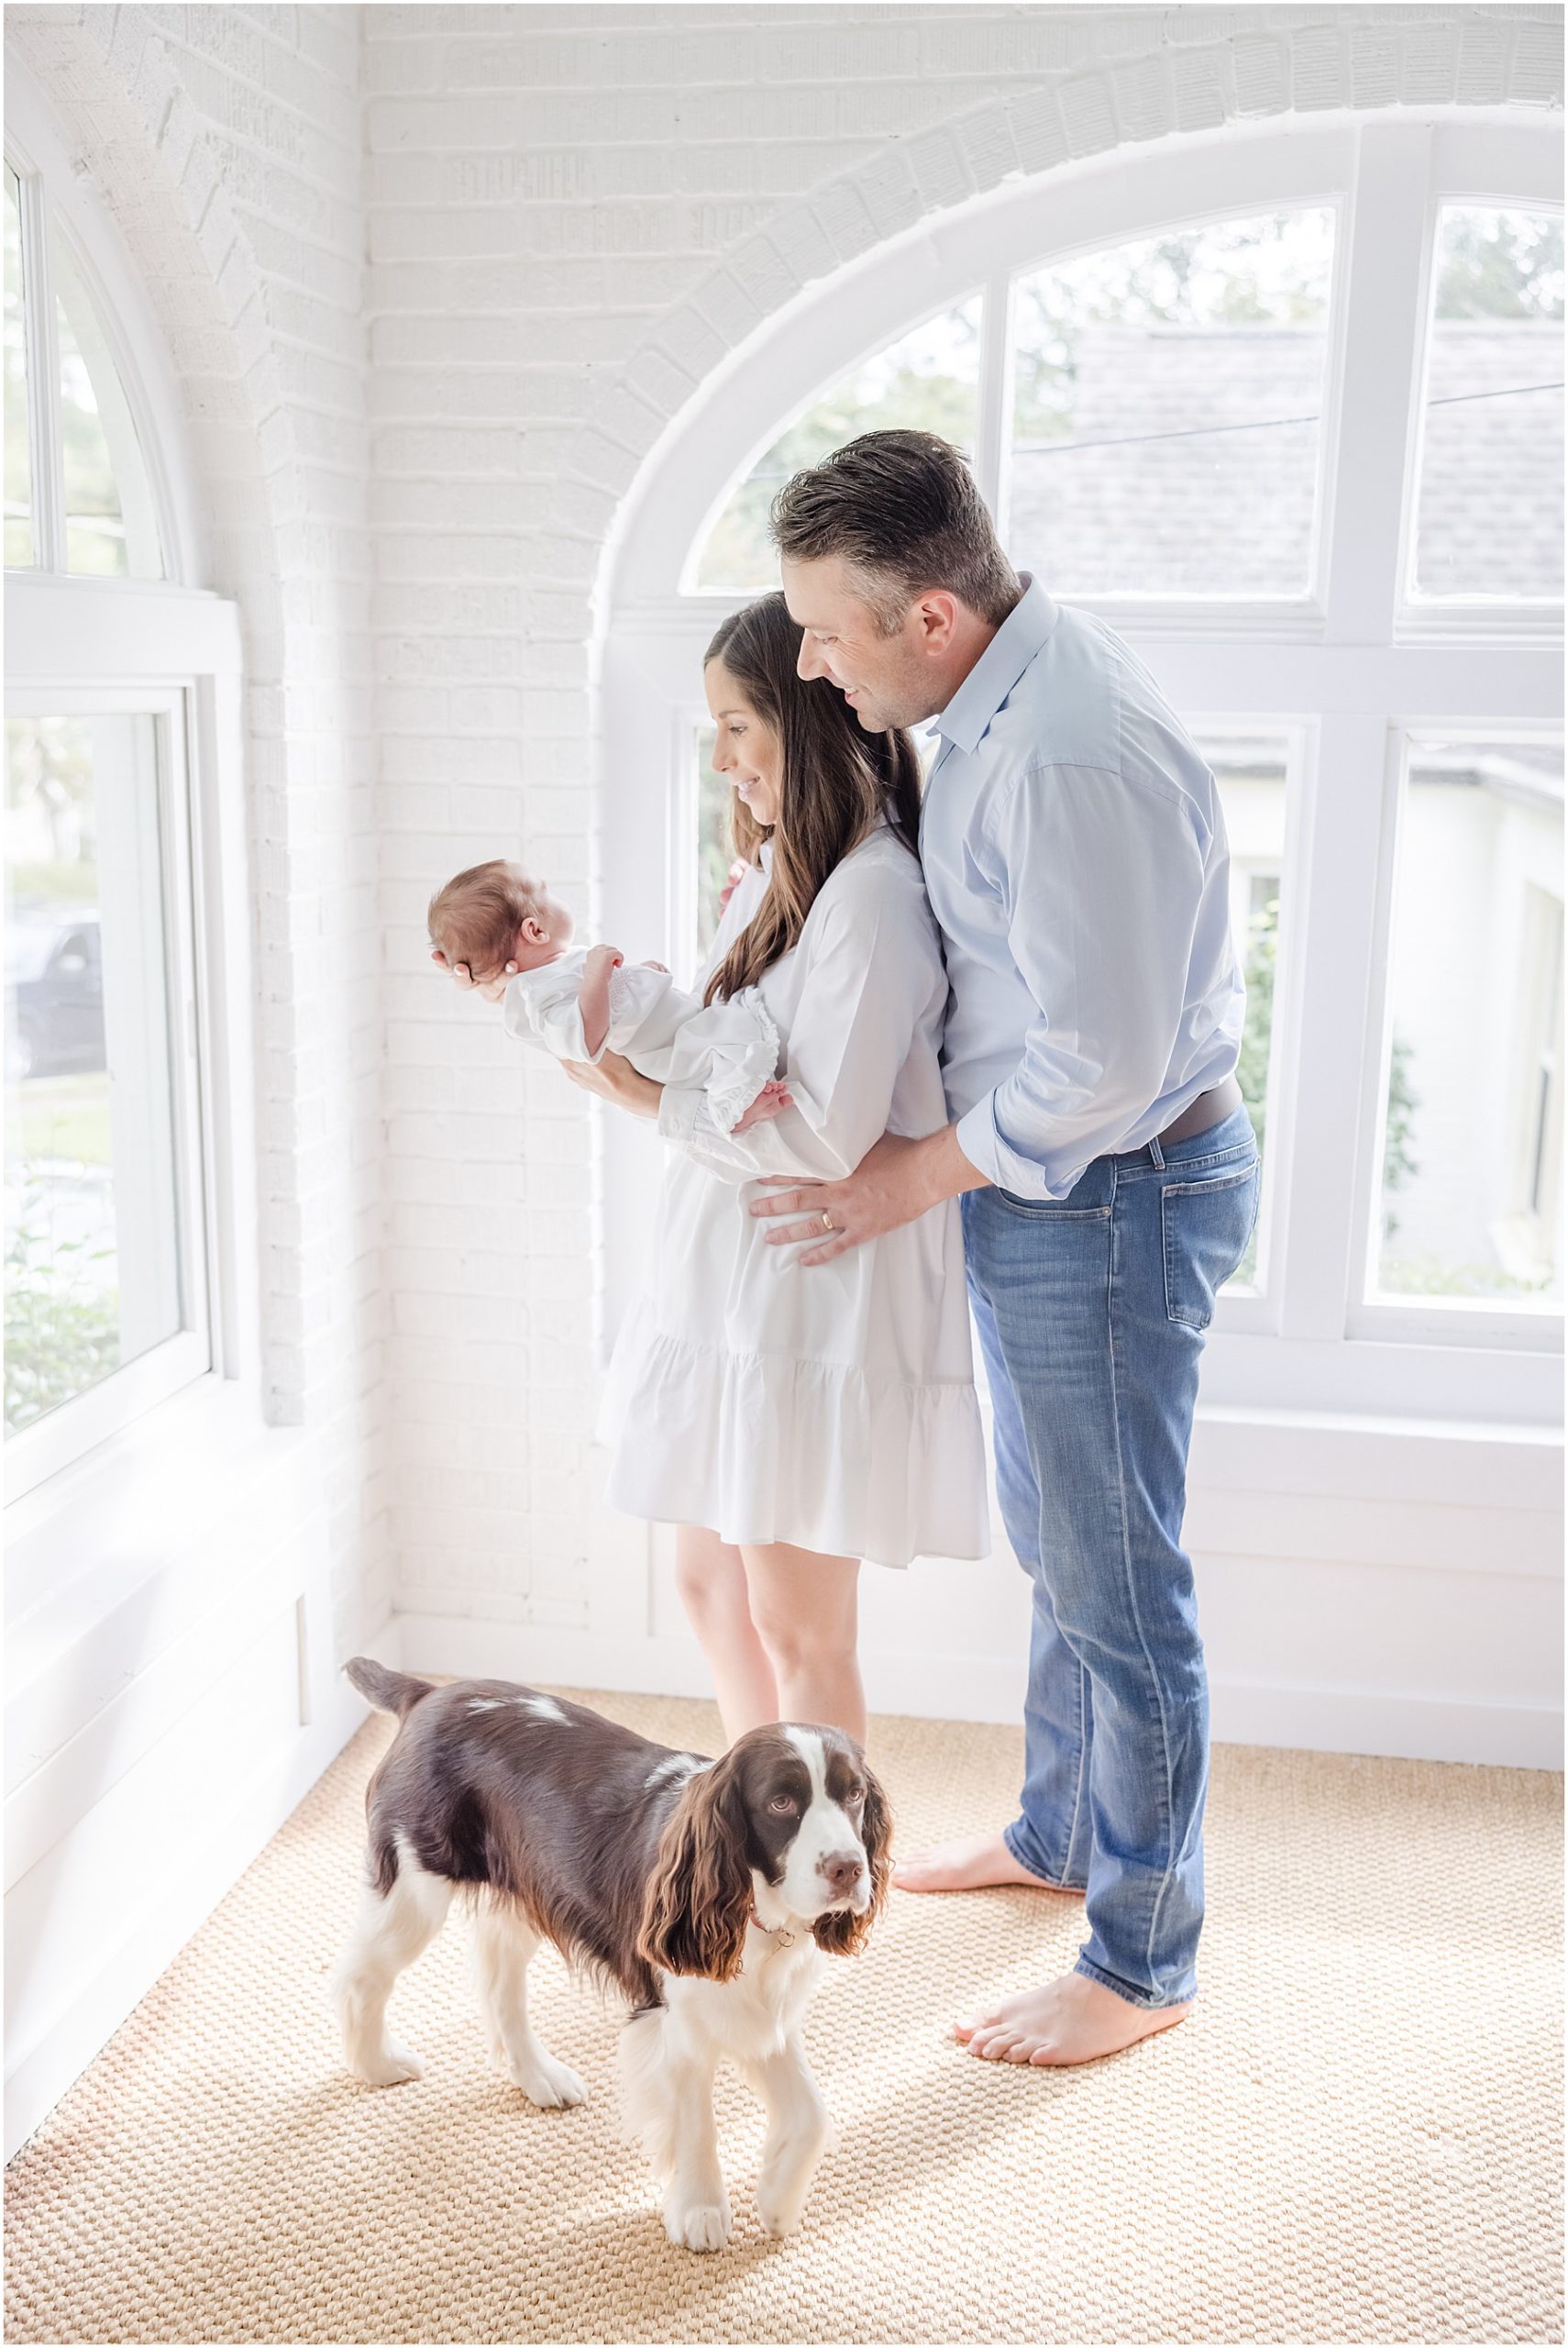 Mother and father looking at their baby while their dog stands at their feet for their Greenville newborn photo session.